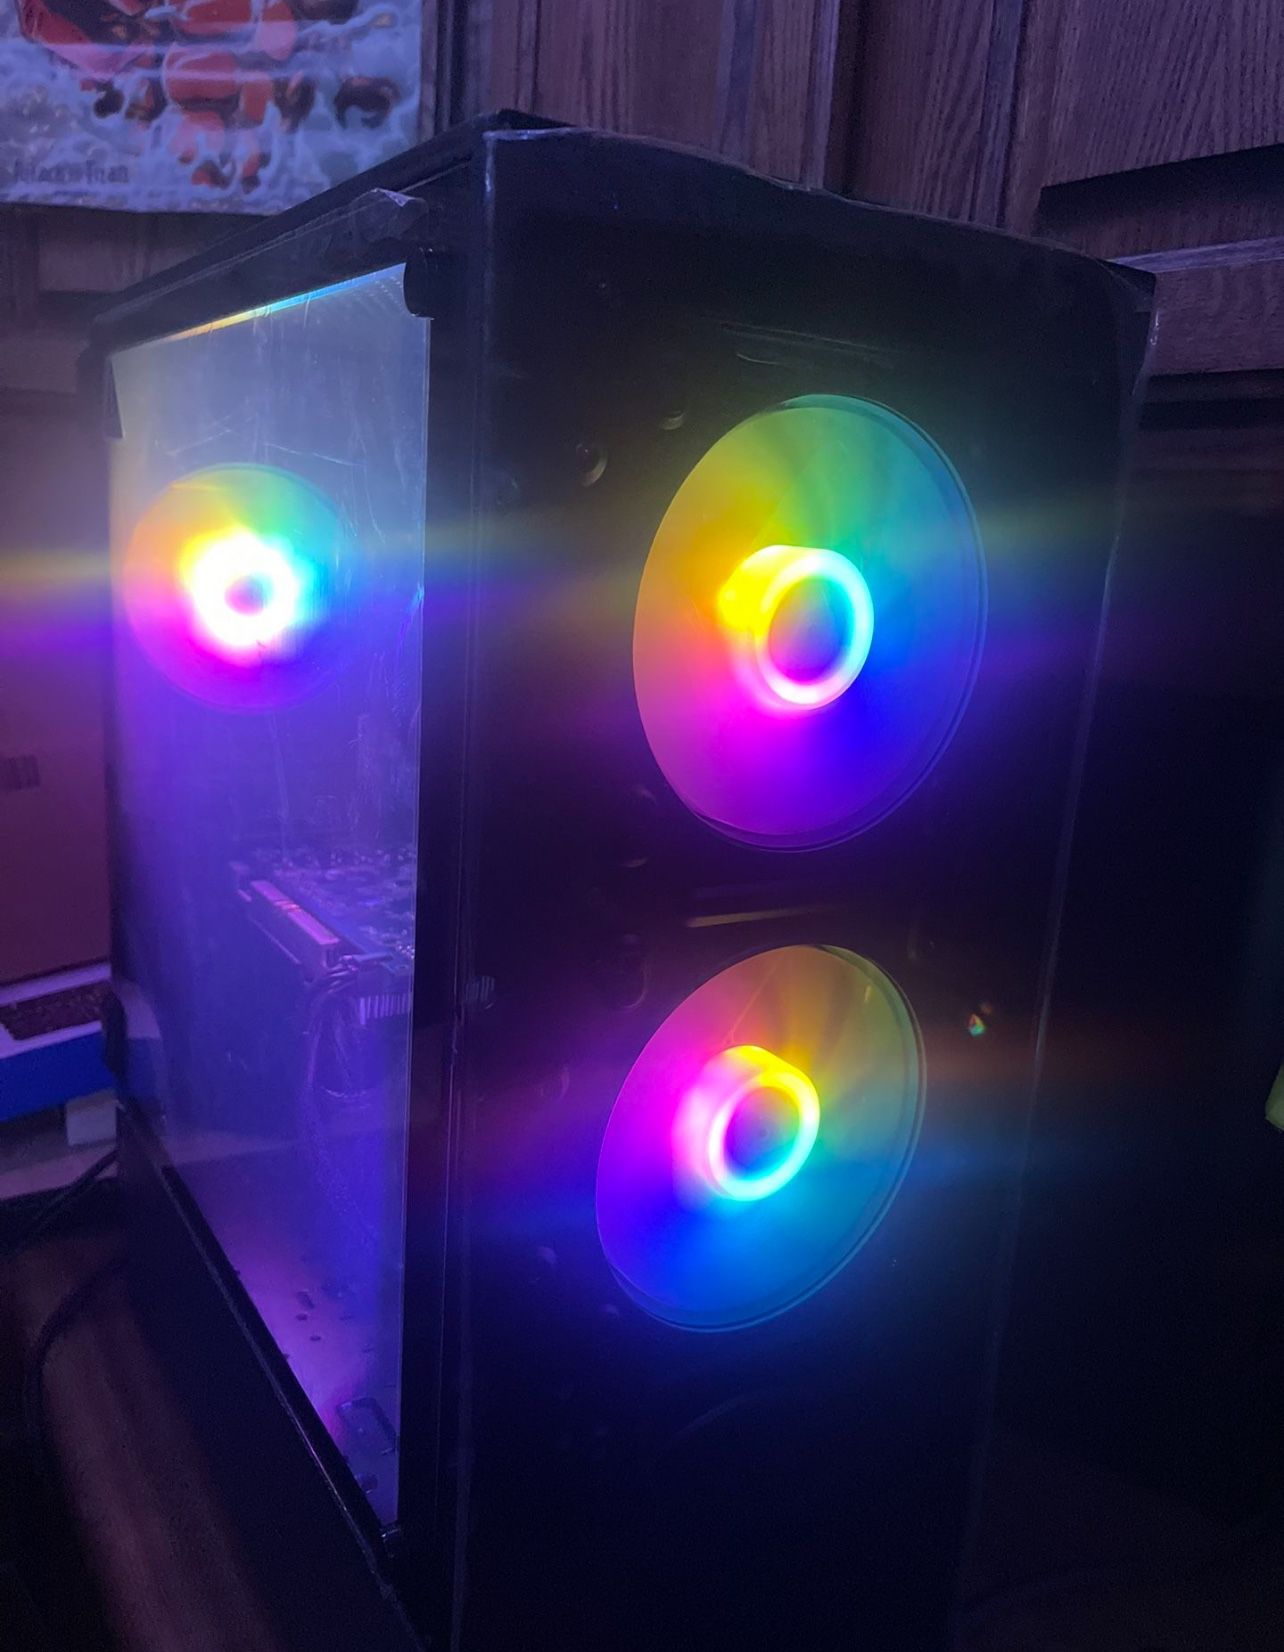 NEW GAMING PC (VALORANT, APEX LEGENDS, FORTNITE, LETHAL COMPANY, ETC.)